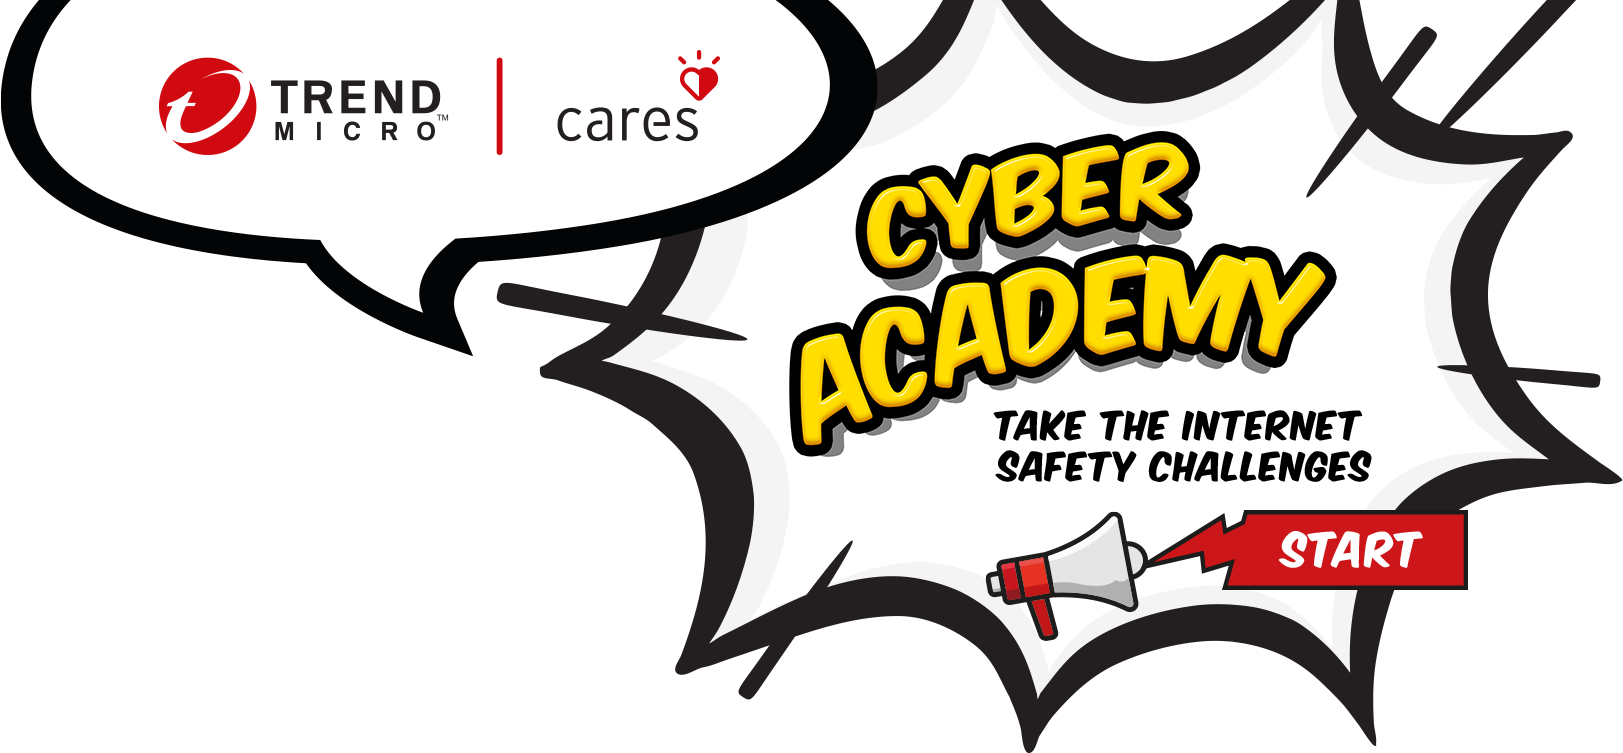 Cyber Academy- Take the internet challenge